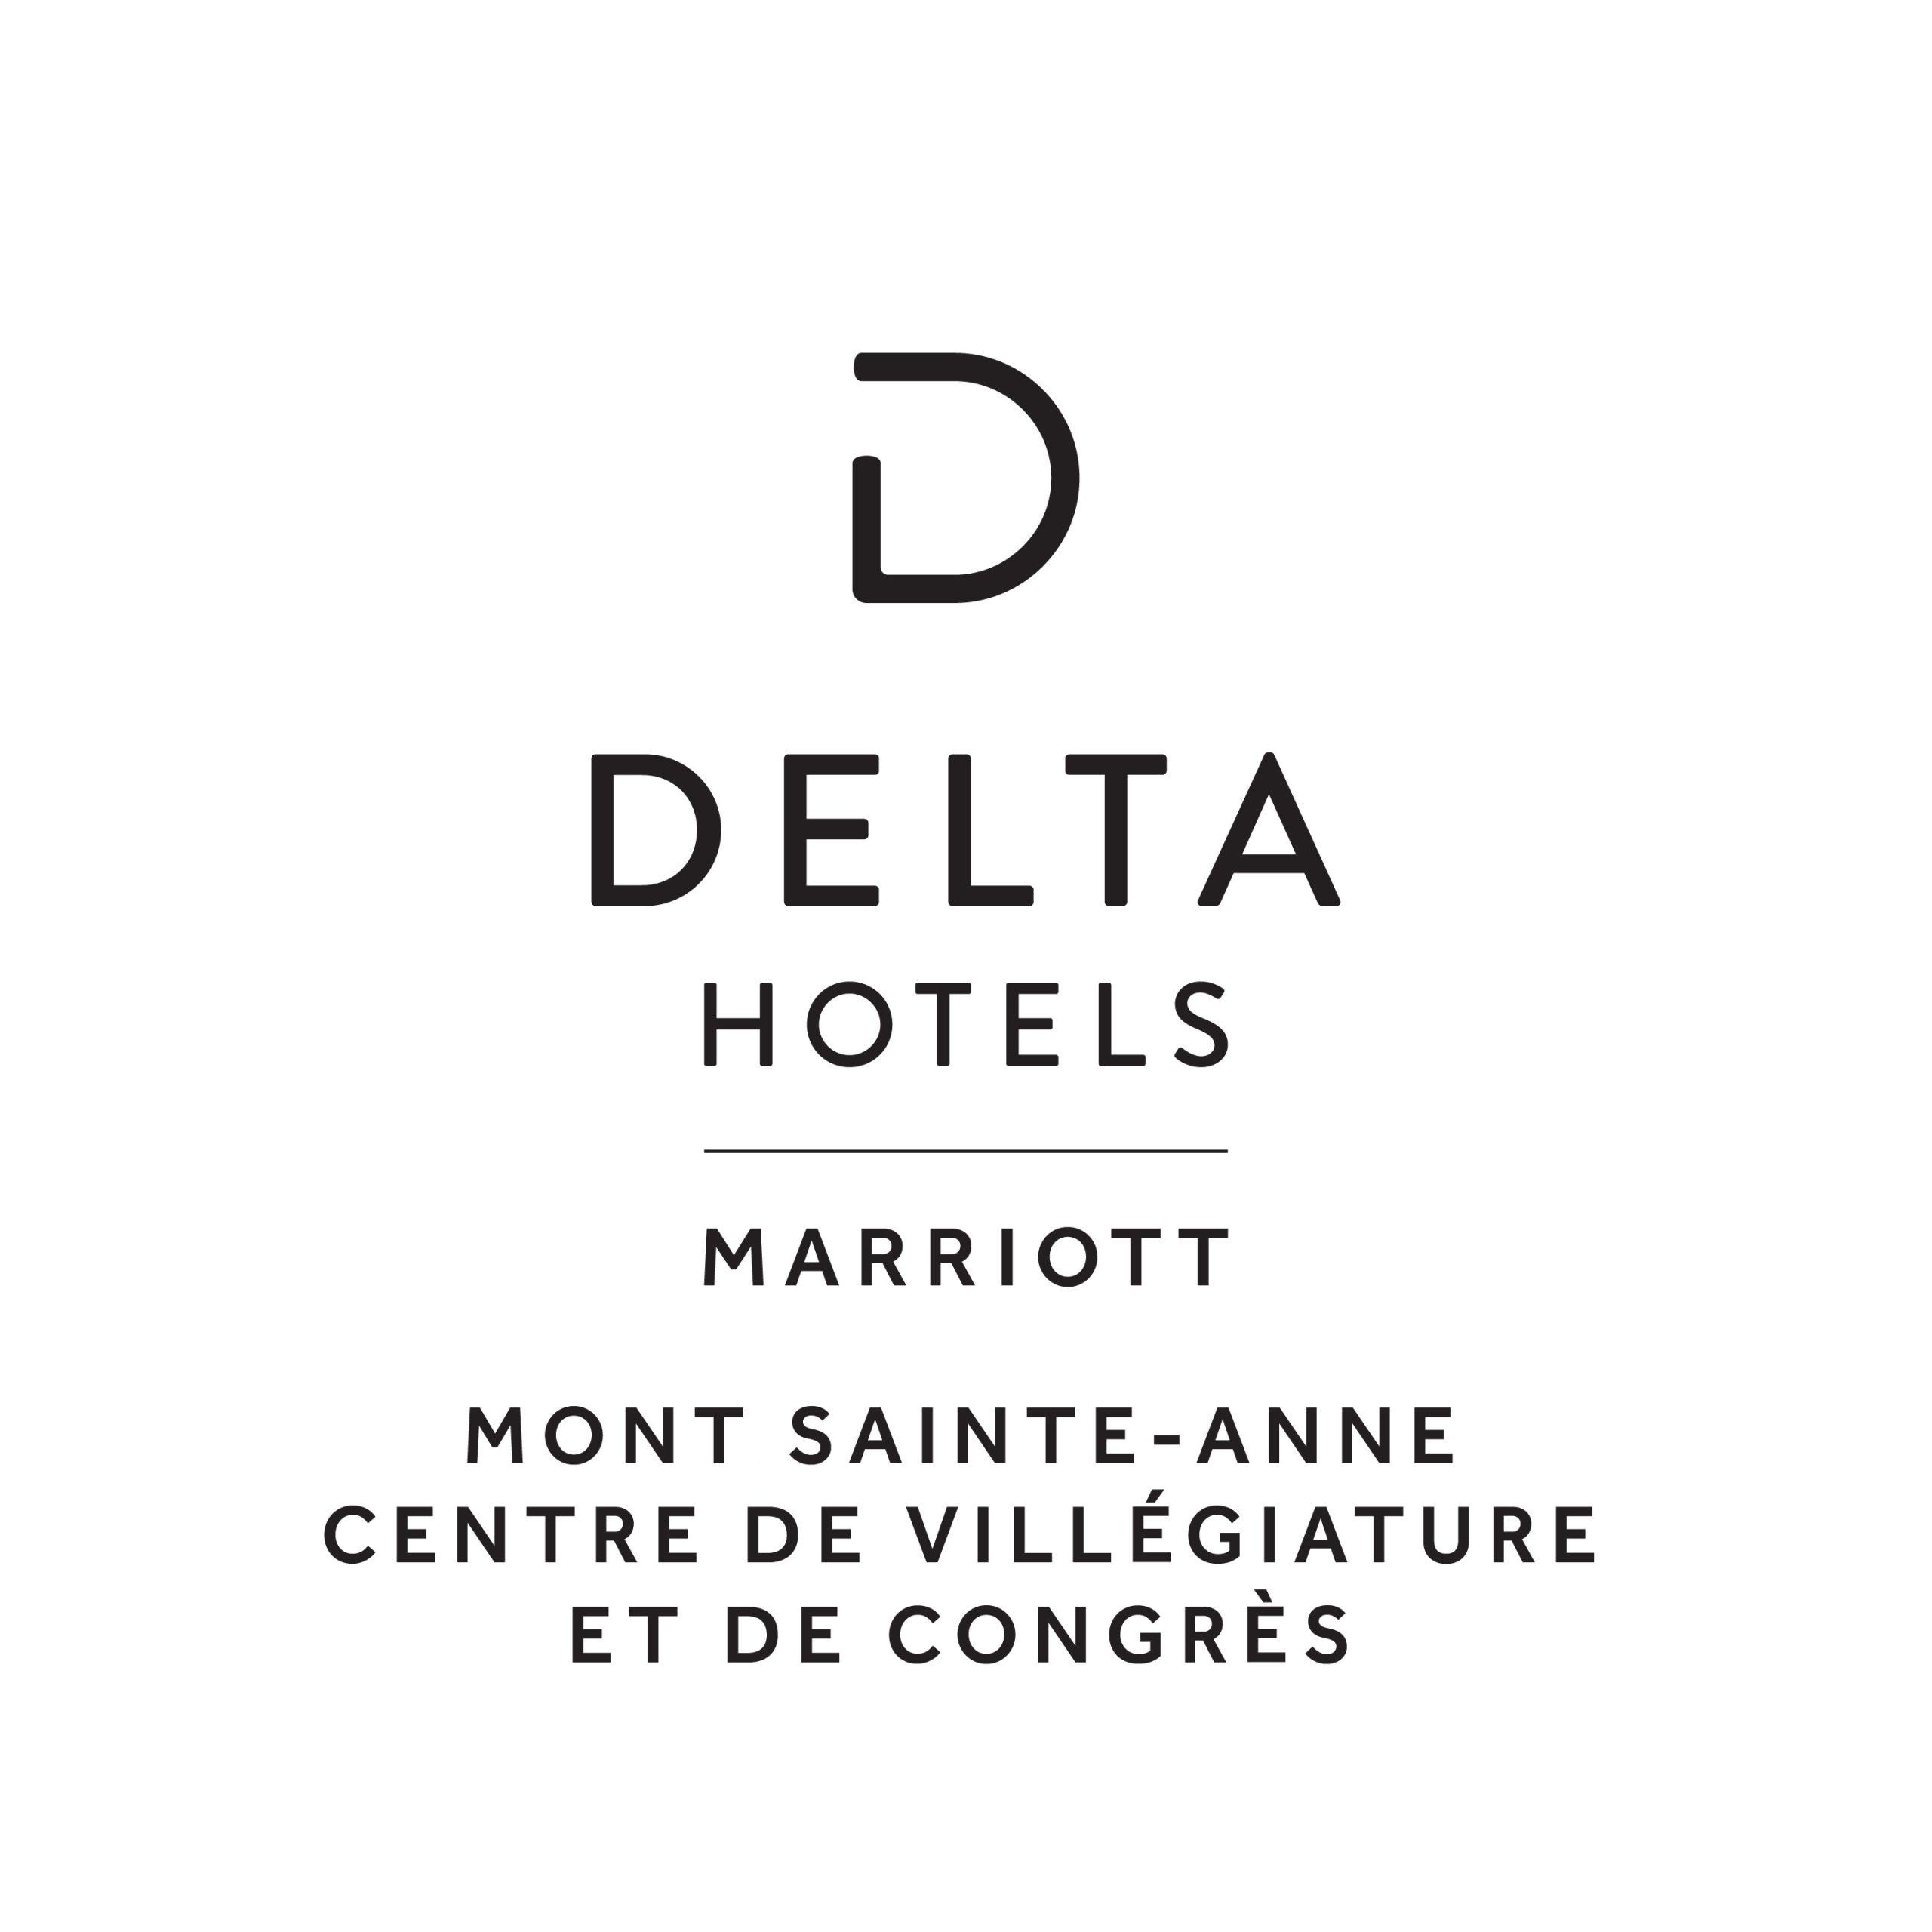 Delta Hotels scaled